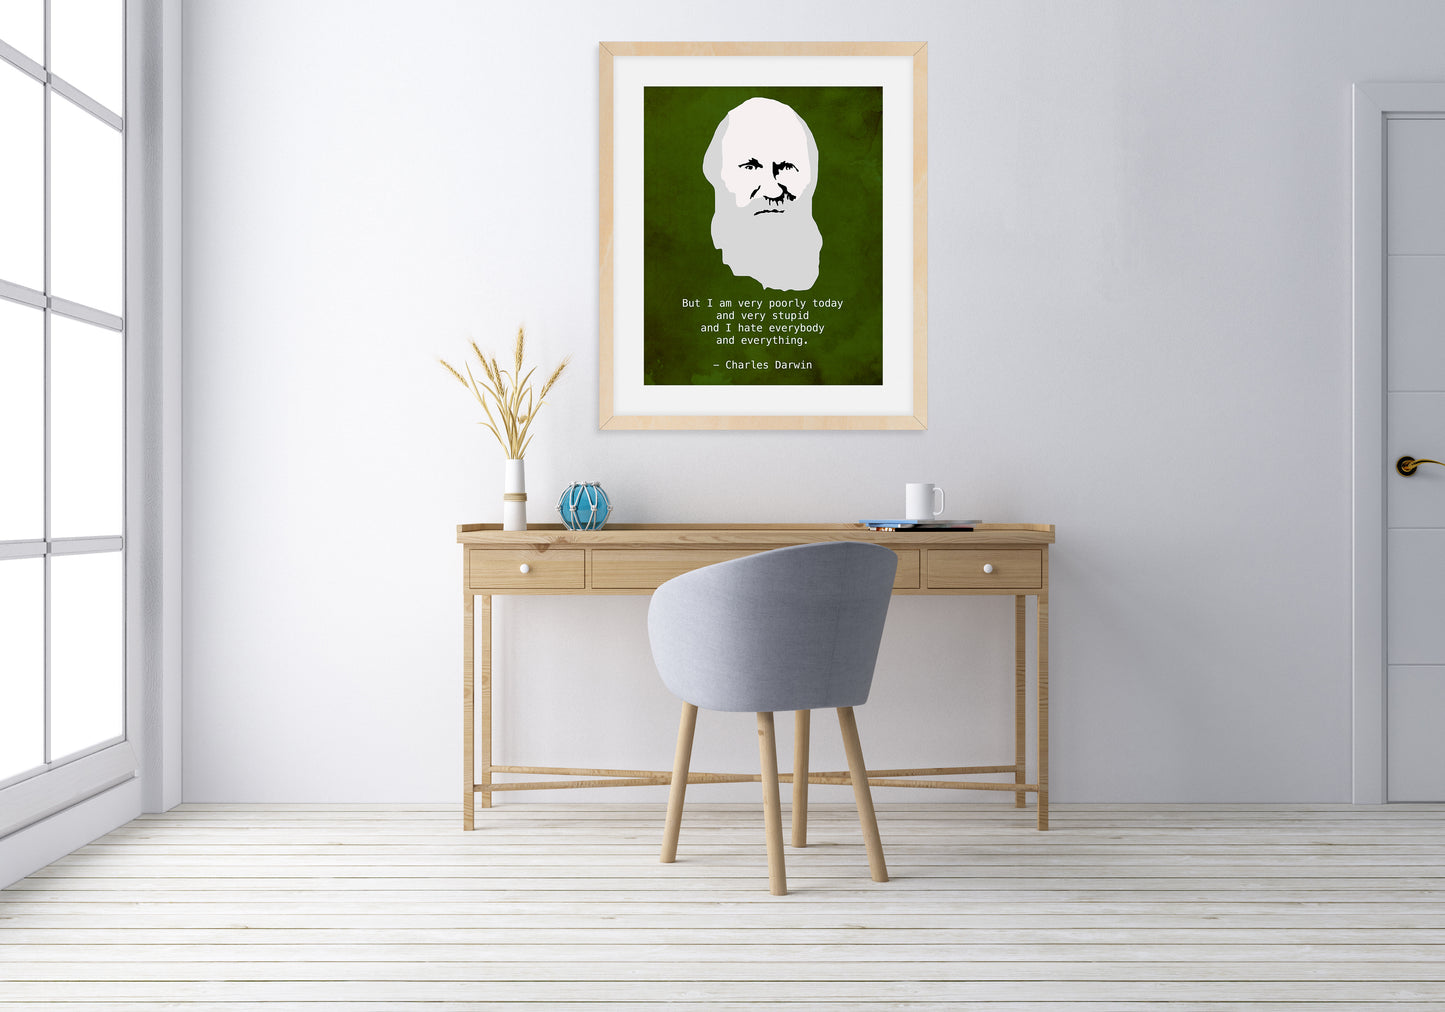 Charles Darwin Grumpy Quote Art Print, Portrait and Funny Introvert Decor